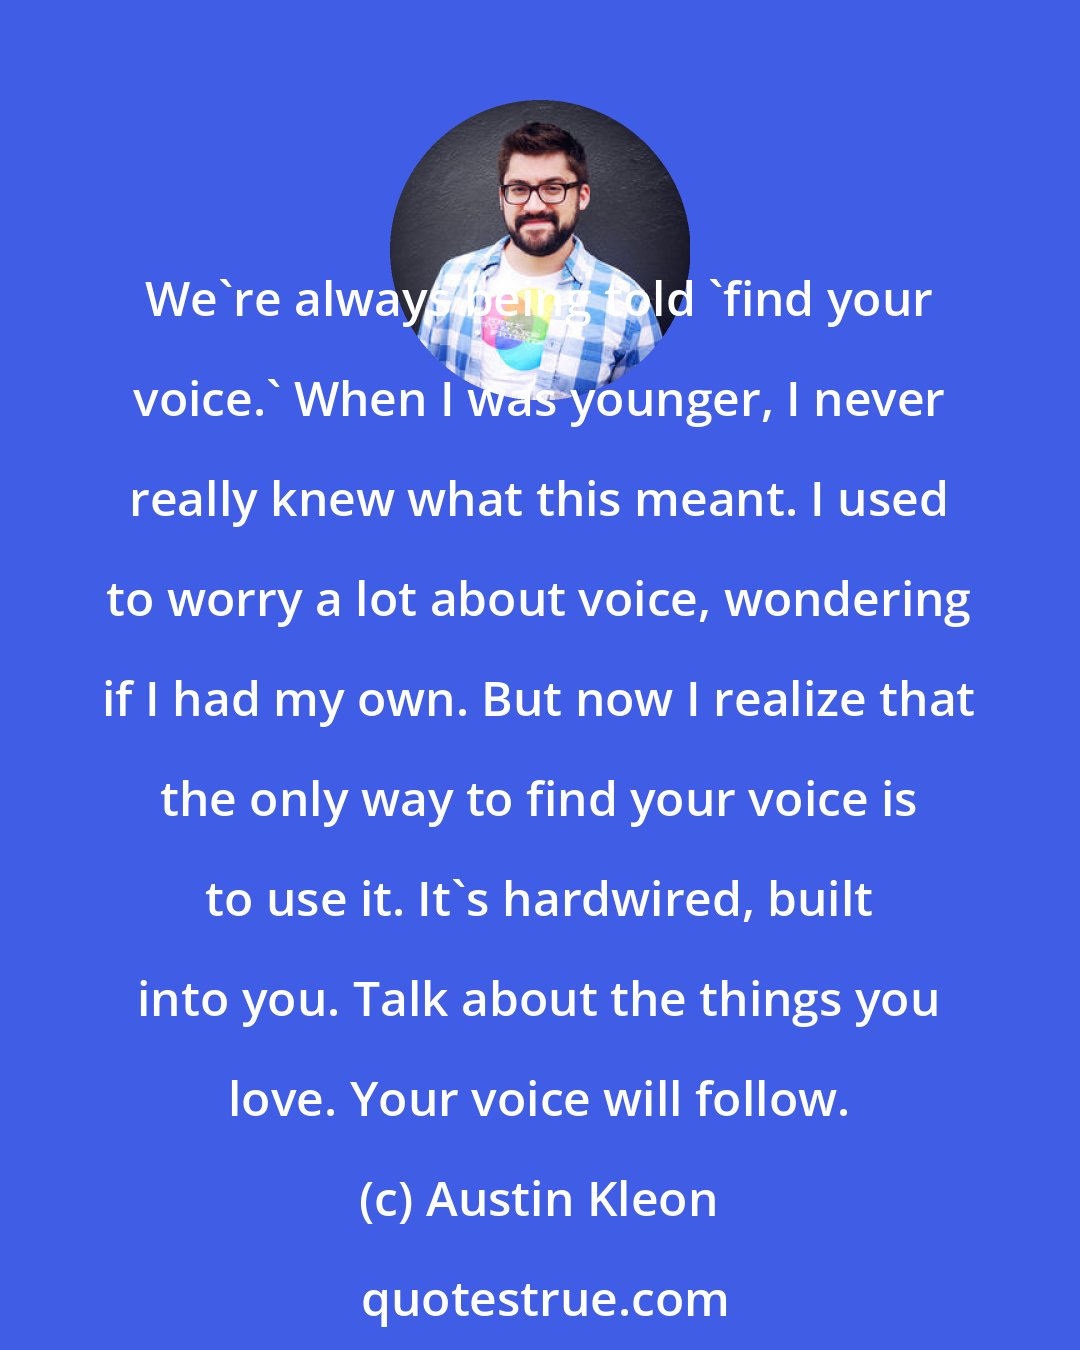 Austin Kleon: We're always being told 'find your voice.' When I was younger, I never really knew what this meant. I used to worry a lot about voice, wondering if I had my own. But now I realize that the only way to find your voice is to use it. It's hardwired, built into you. Talk about the things you love. Your voice will follow.